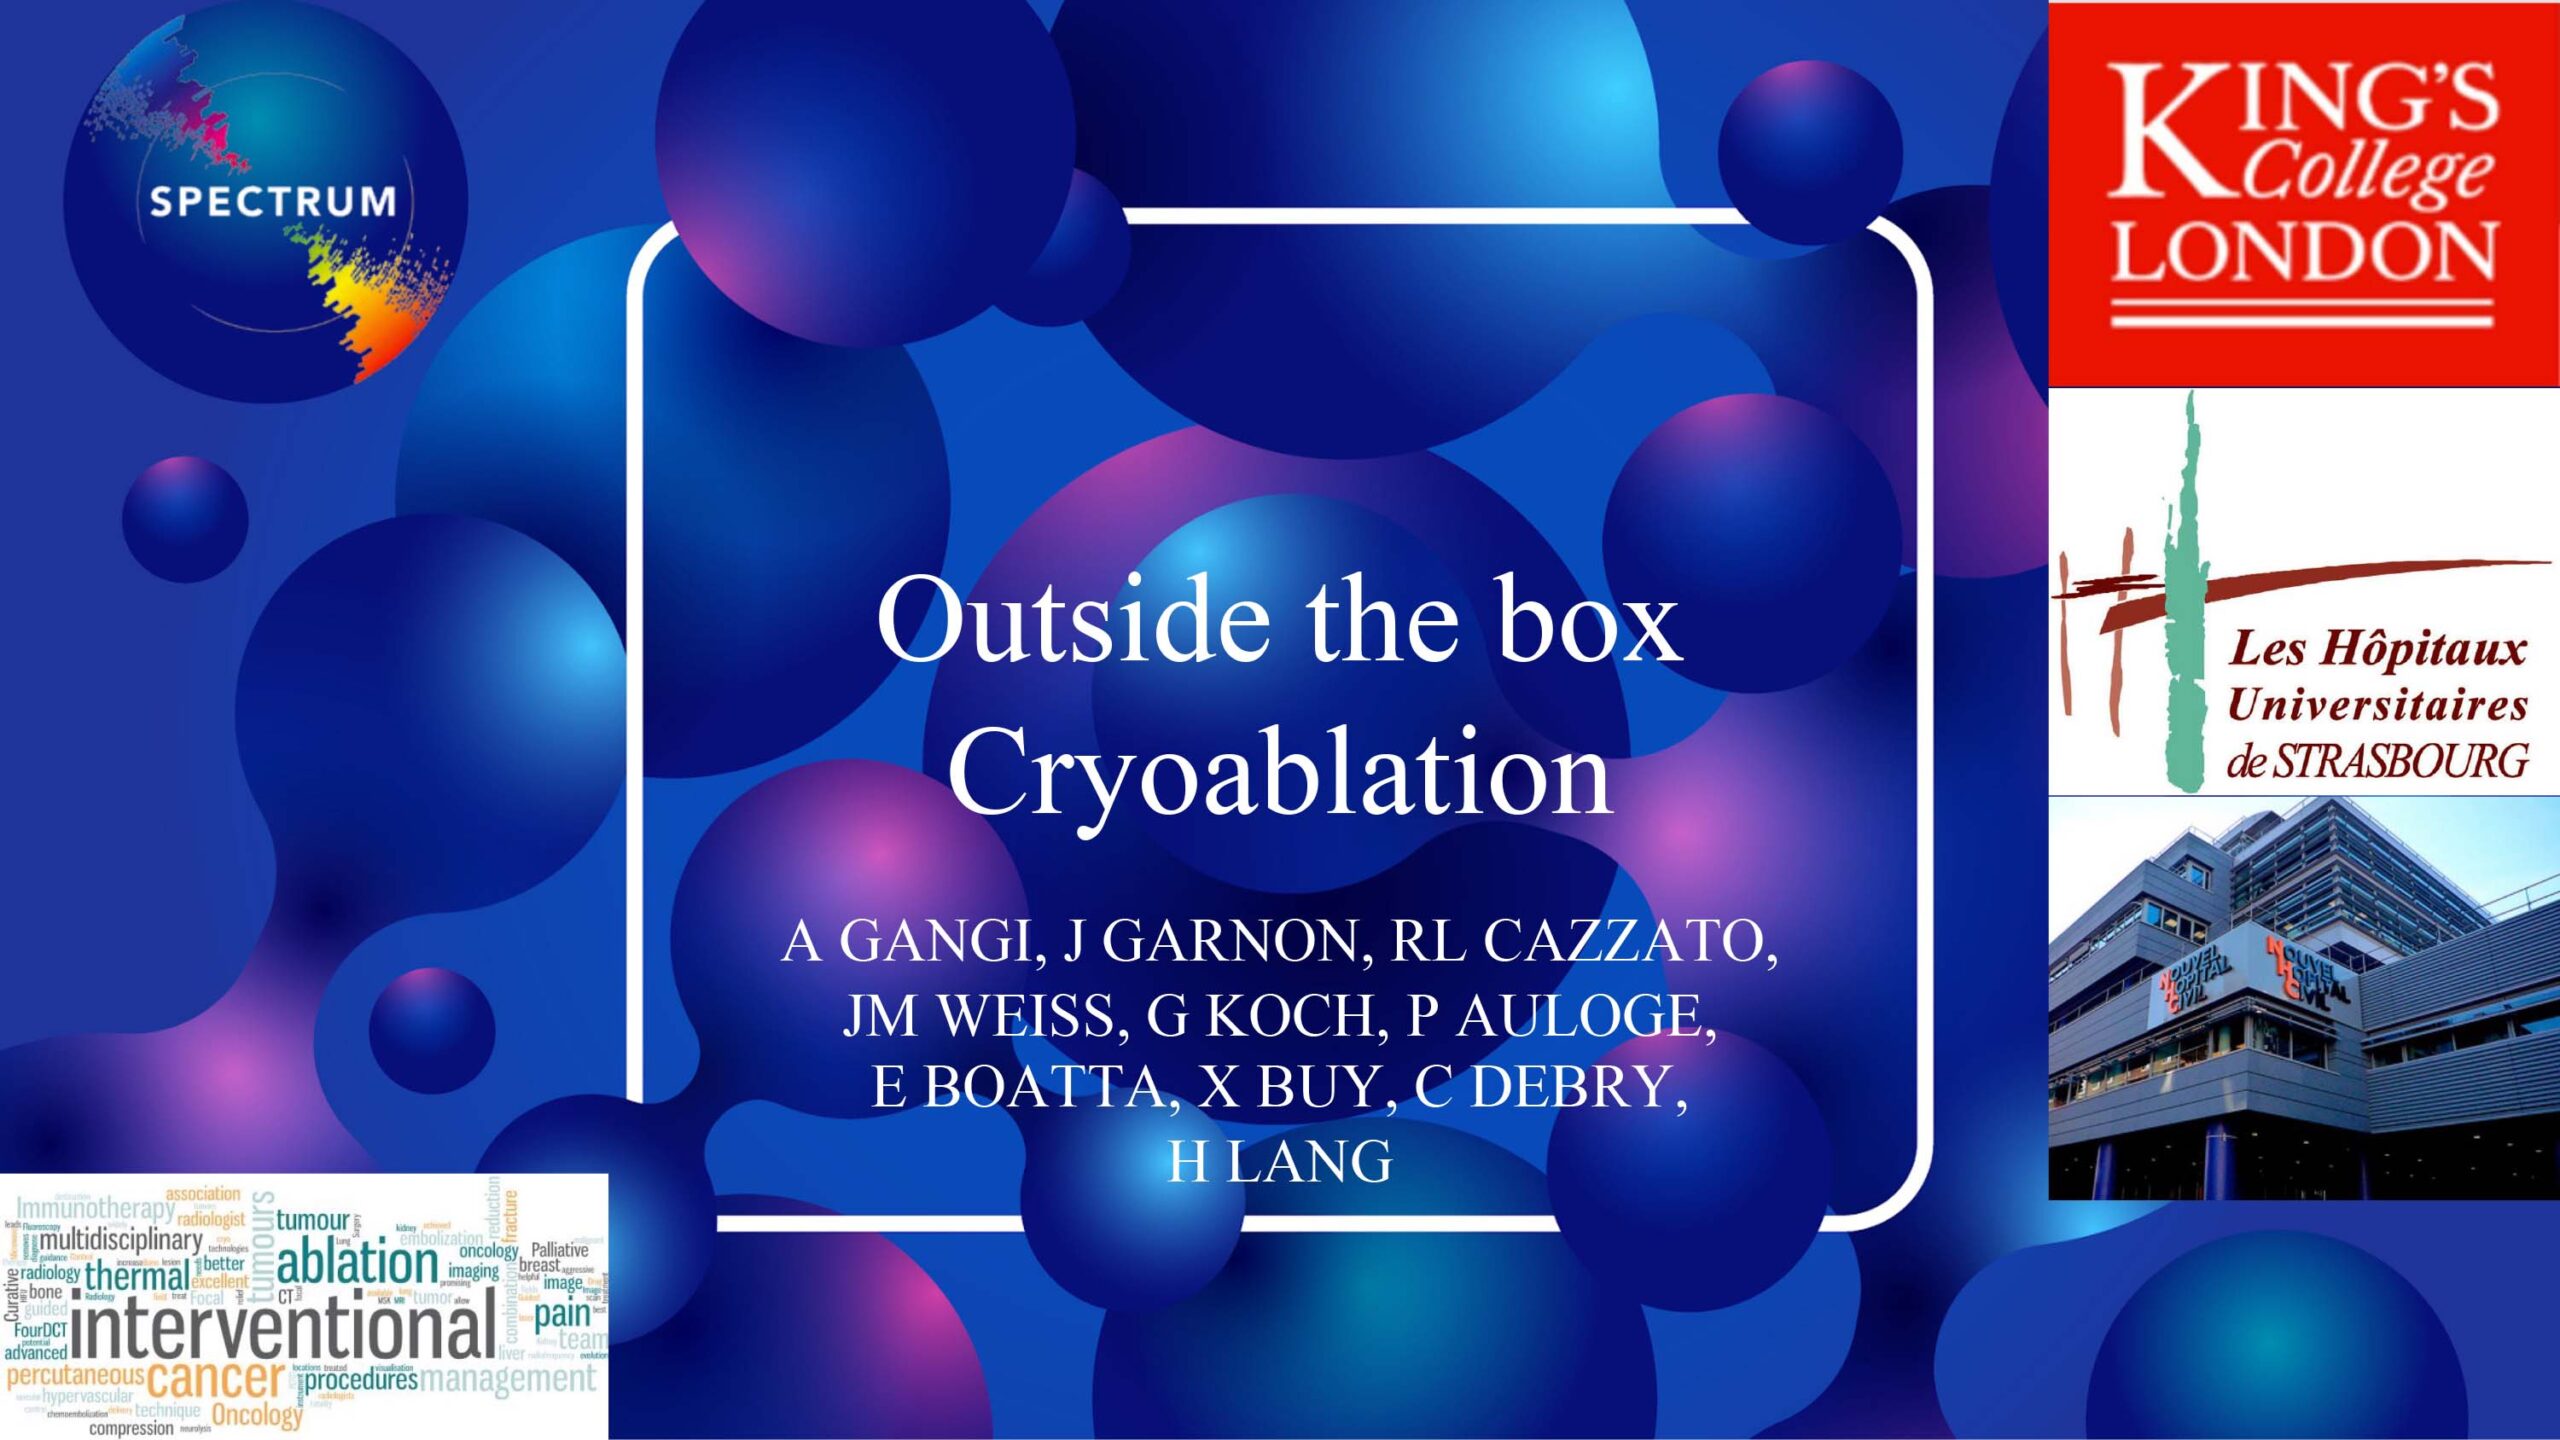 Outside the box applications of Cryoablation